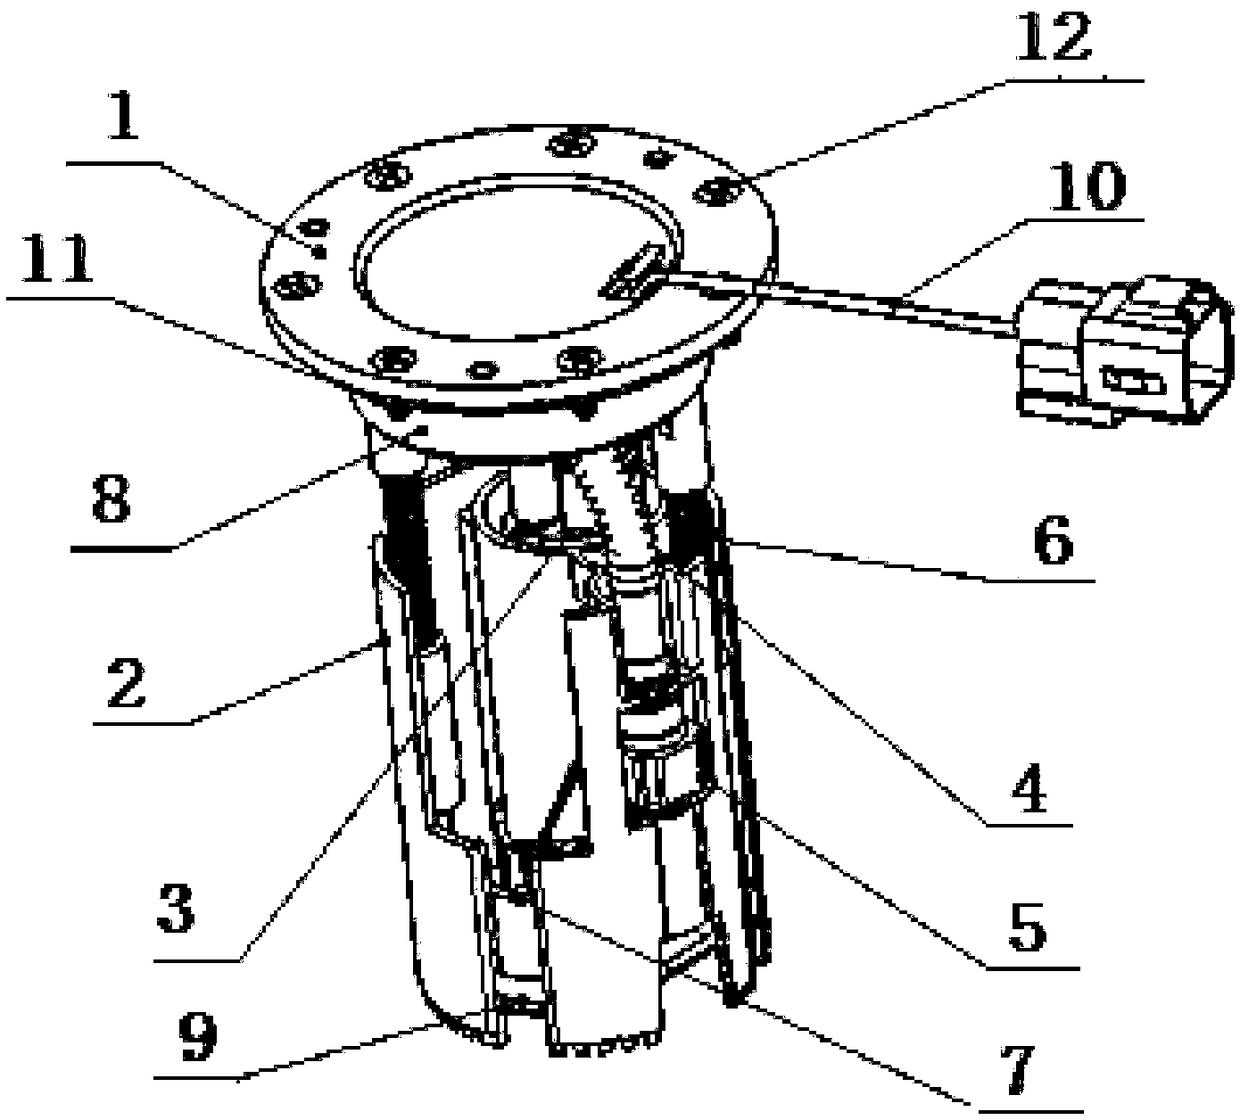 Diesel oil delivery pump assembly for gradient self-adaptation system